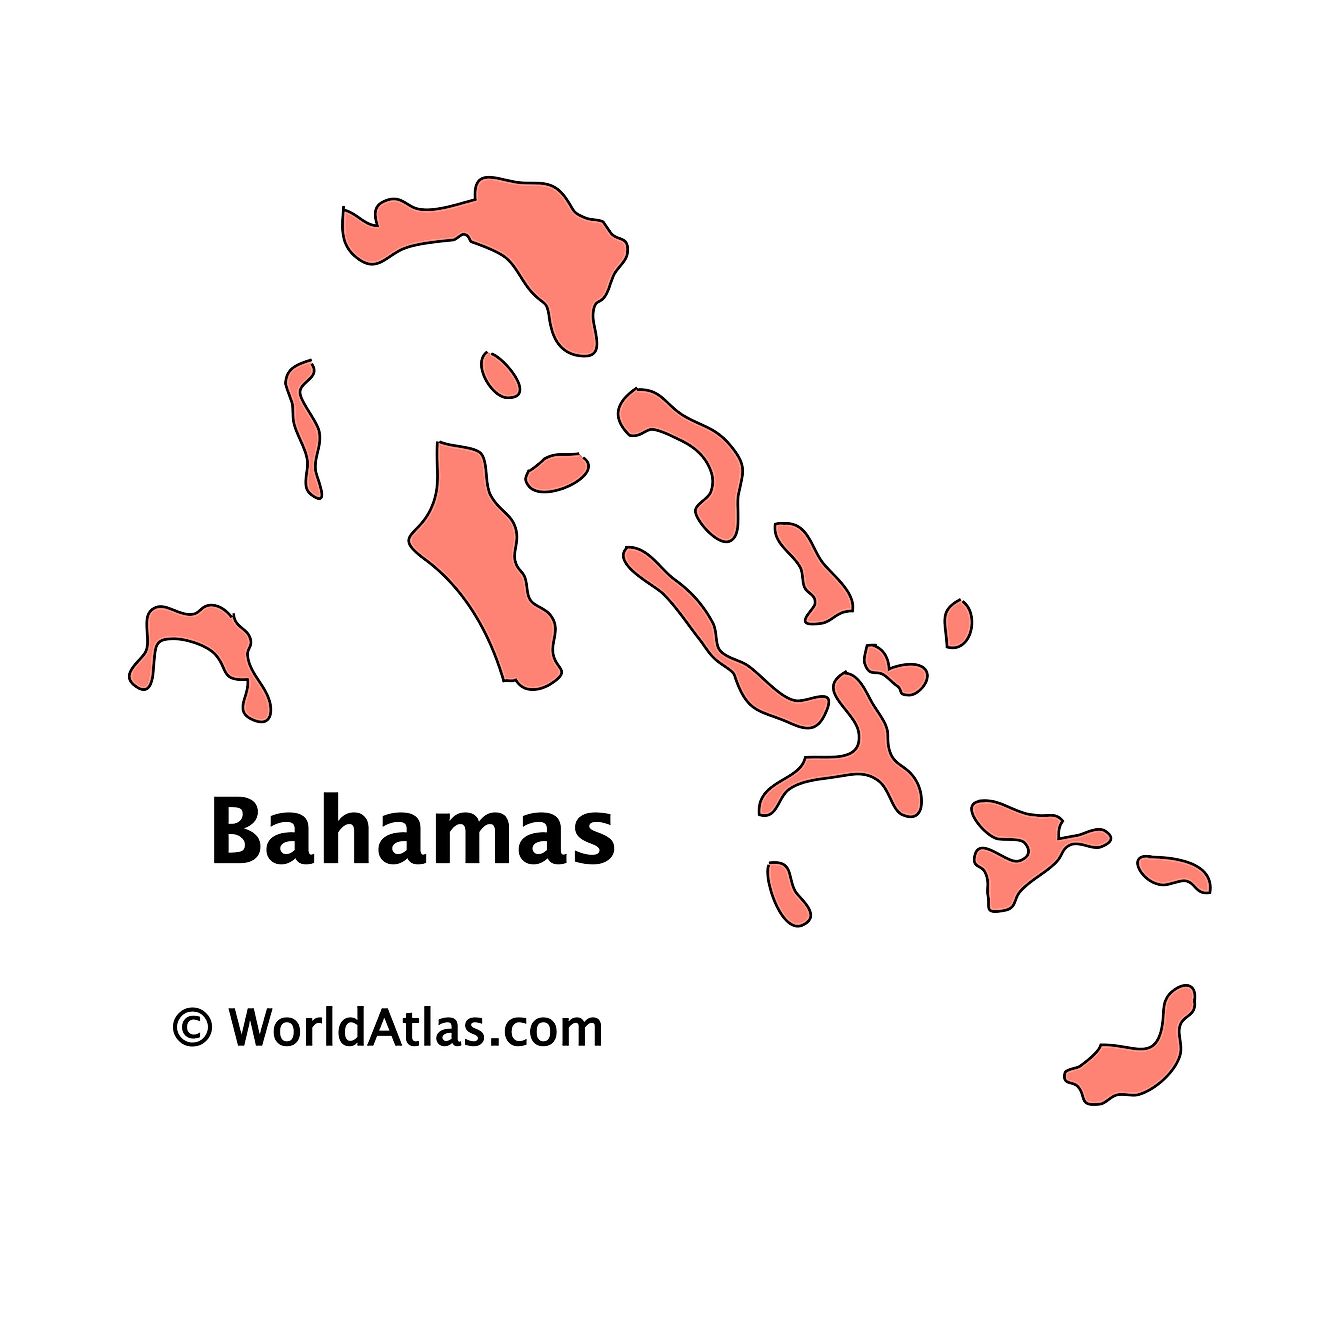 Outline Map of The Bahamas